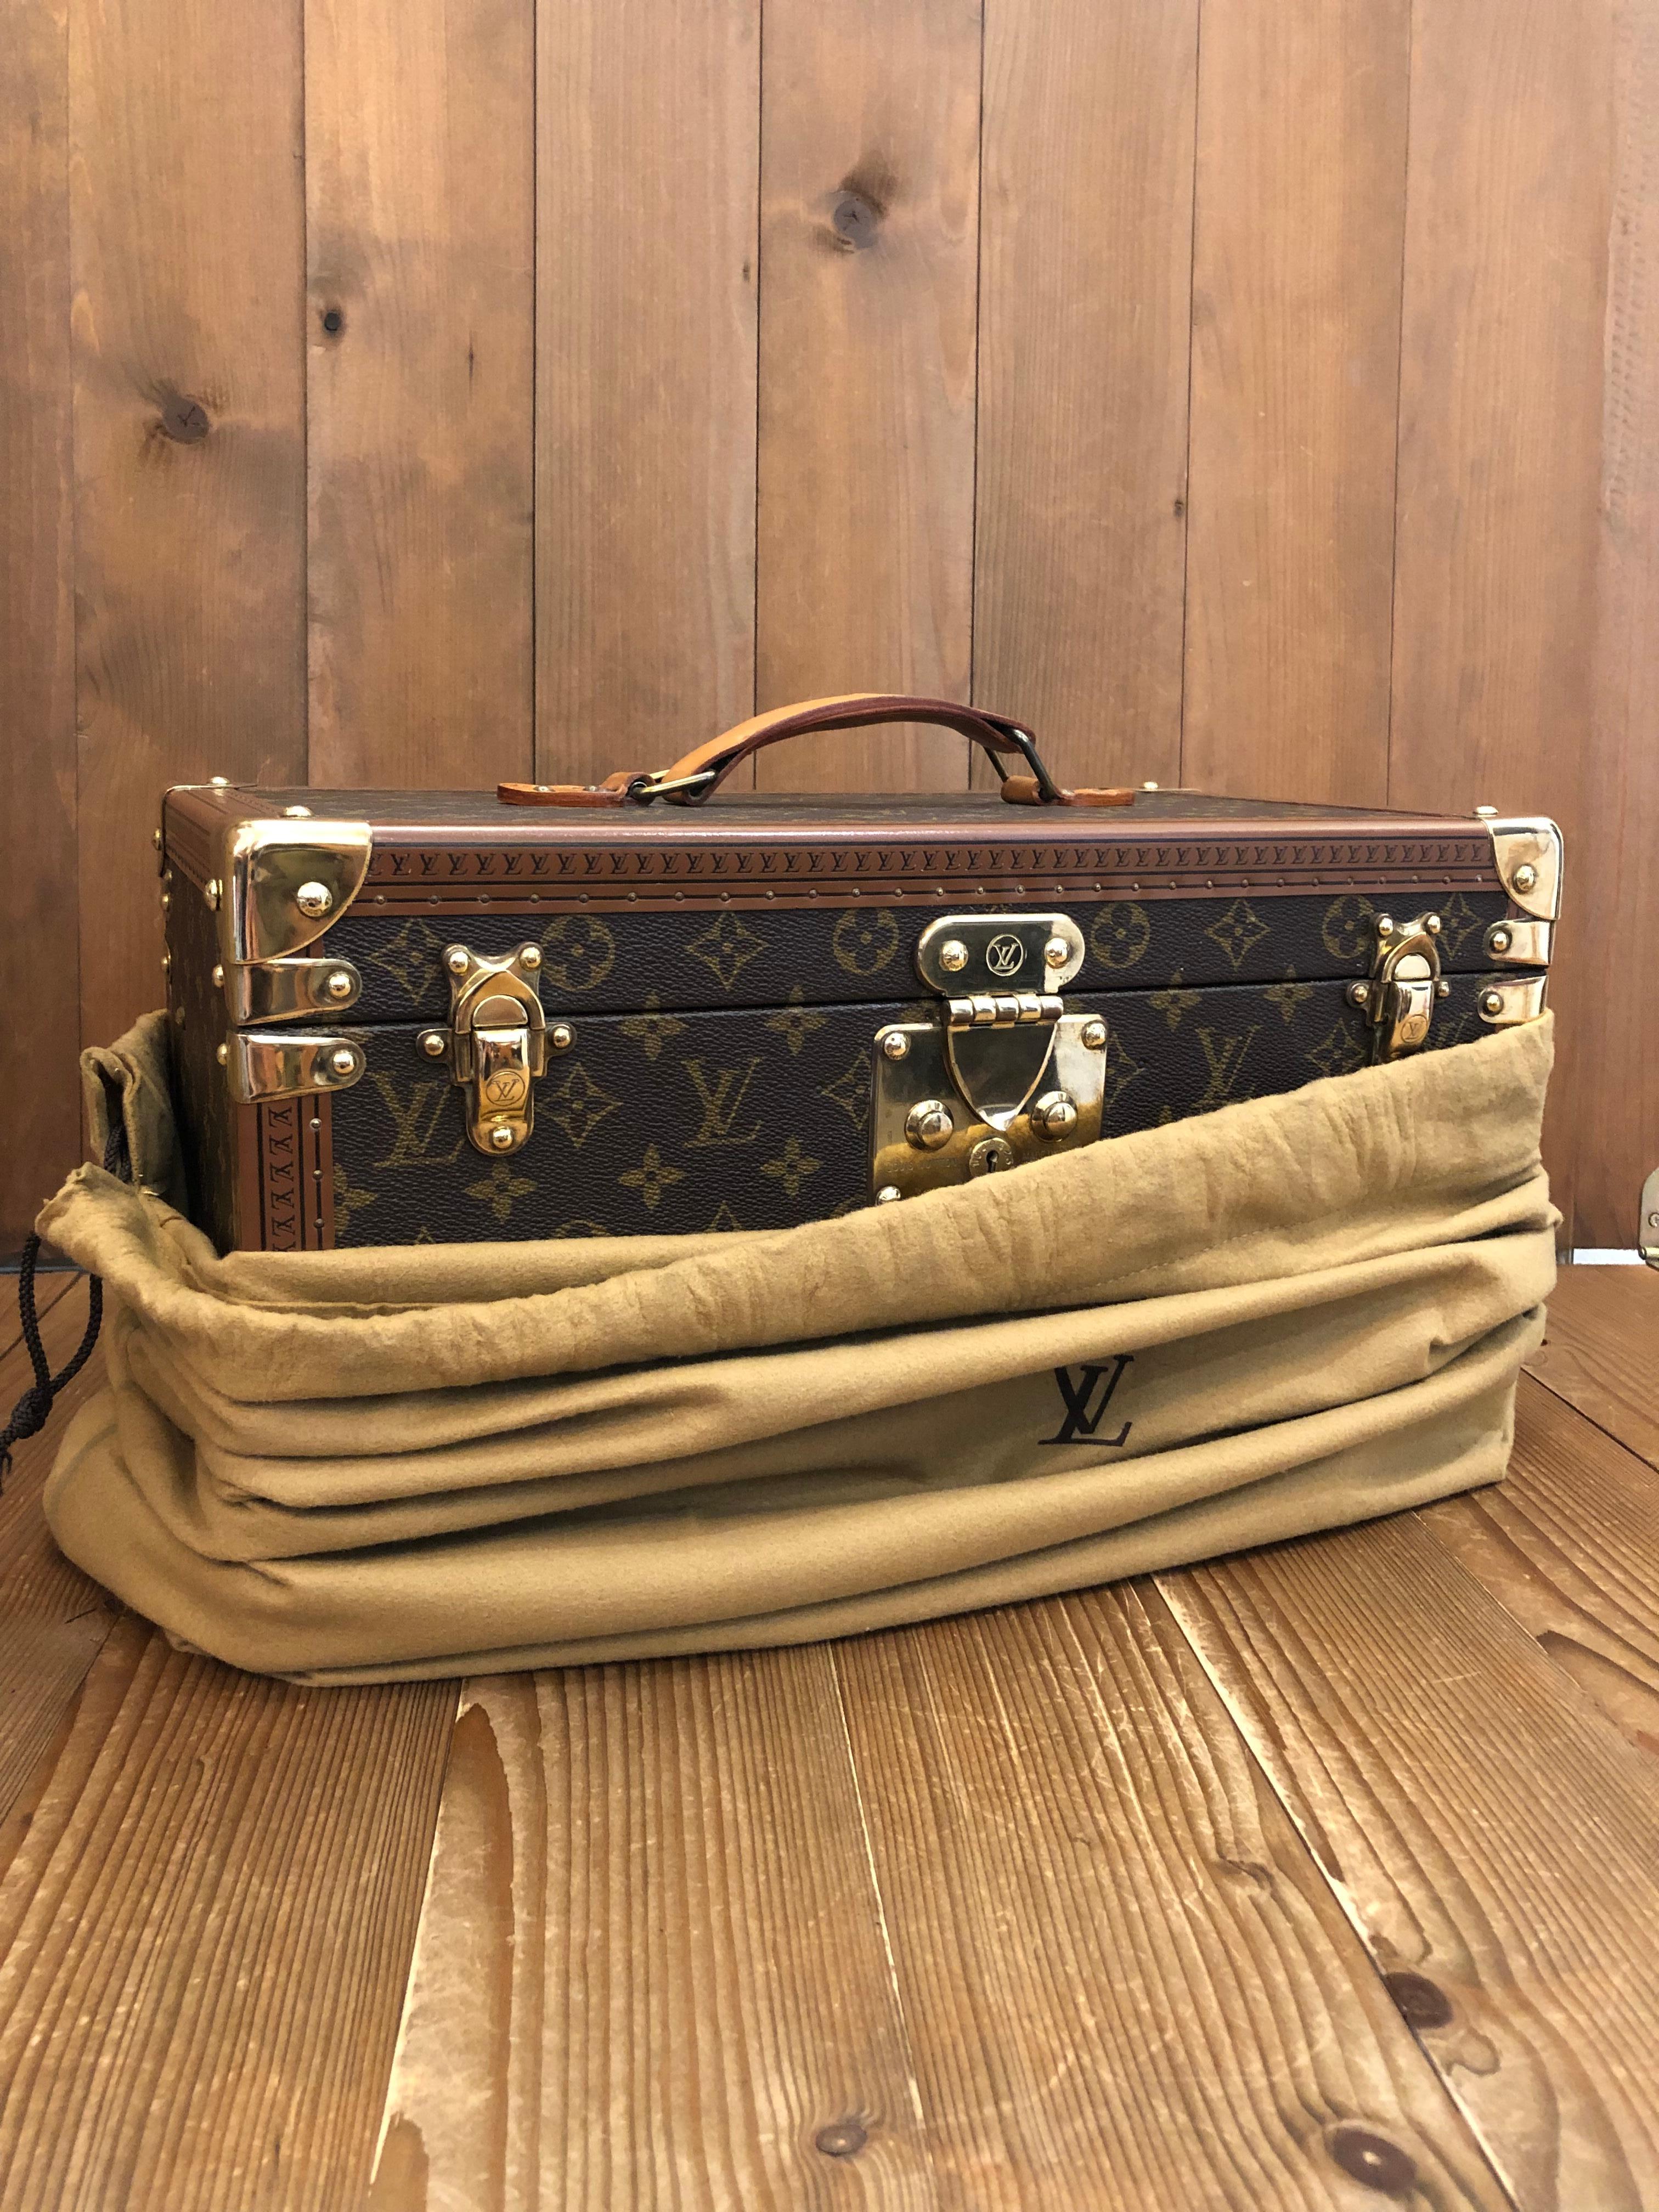 This vintage LOUIS VUITTON Vanity trunk case is crafted of LV’s monogram canvas and vachetta leather. Made in France with serial no 958792. Measures approximately 15.75 x 9 x 8 inches. Comes with dust bag.

Condition: Very good vintage condition